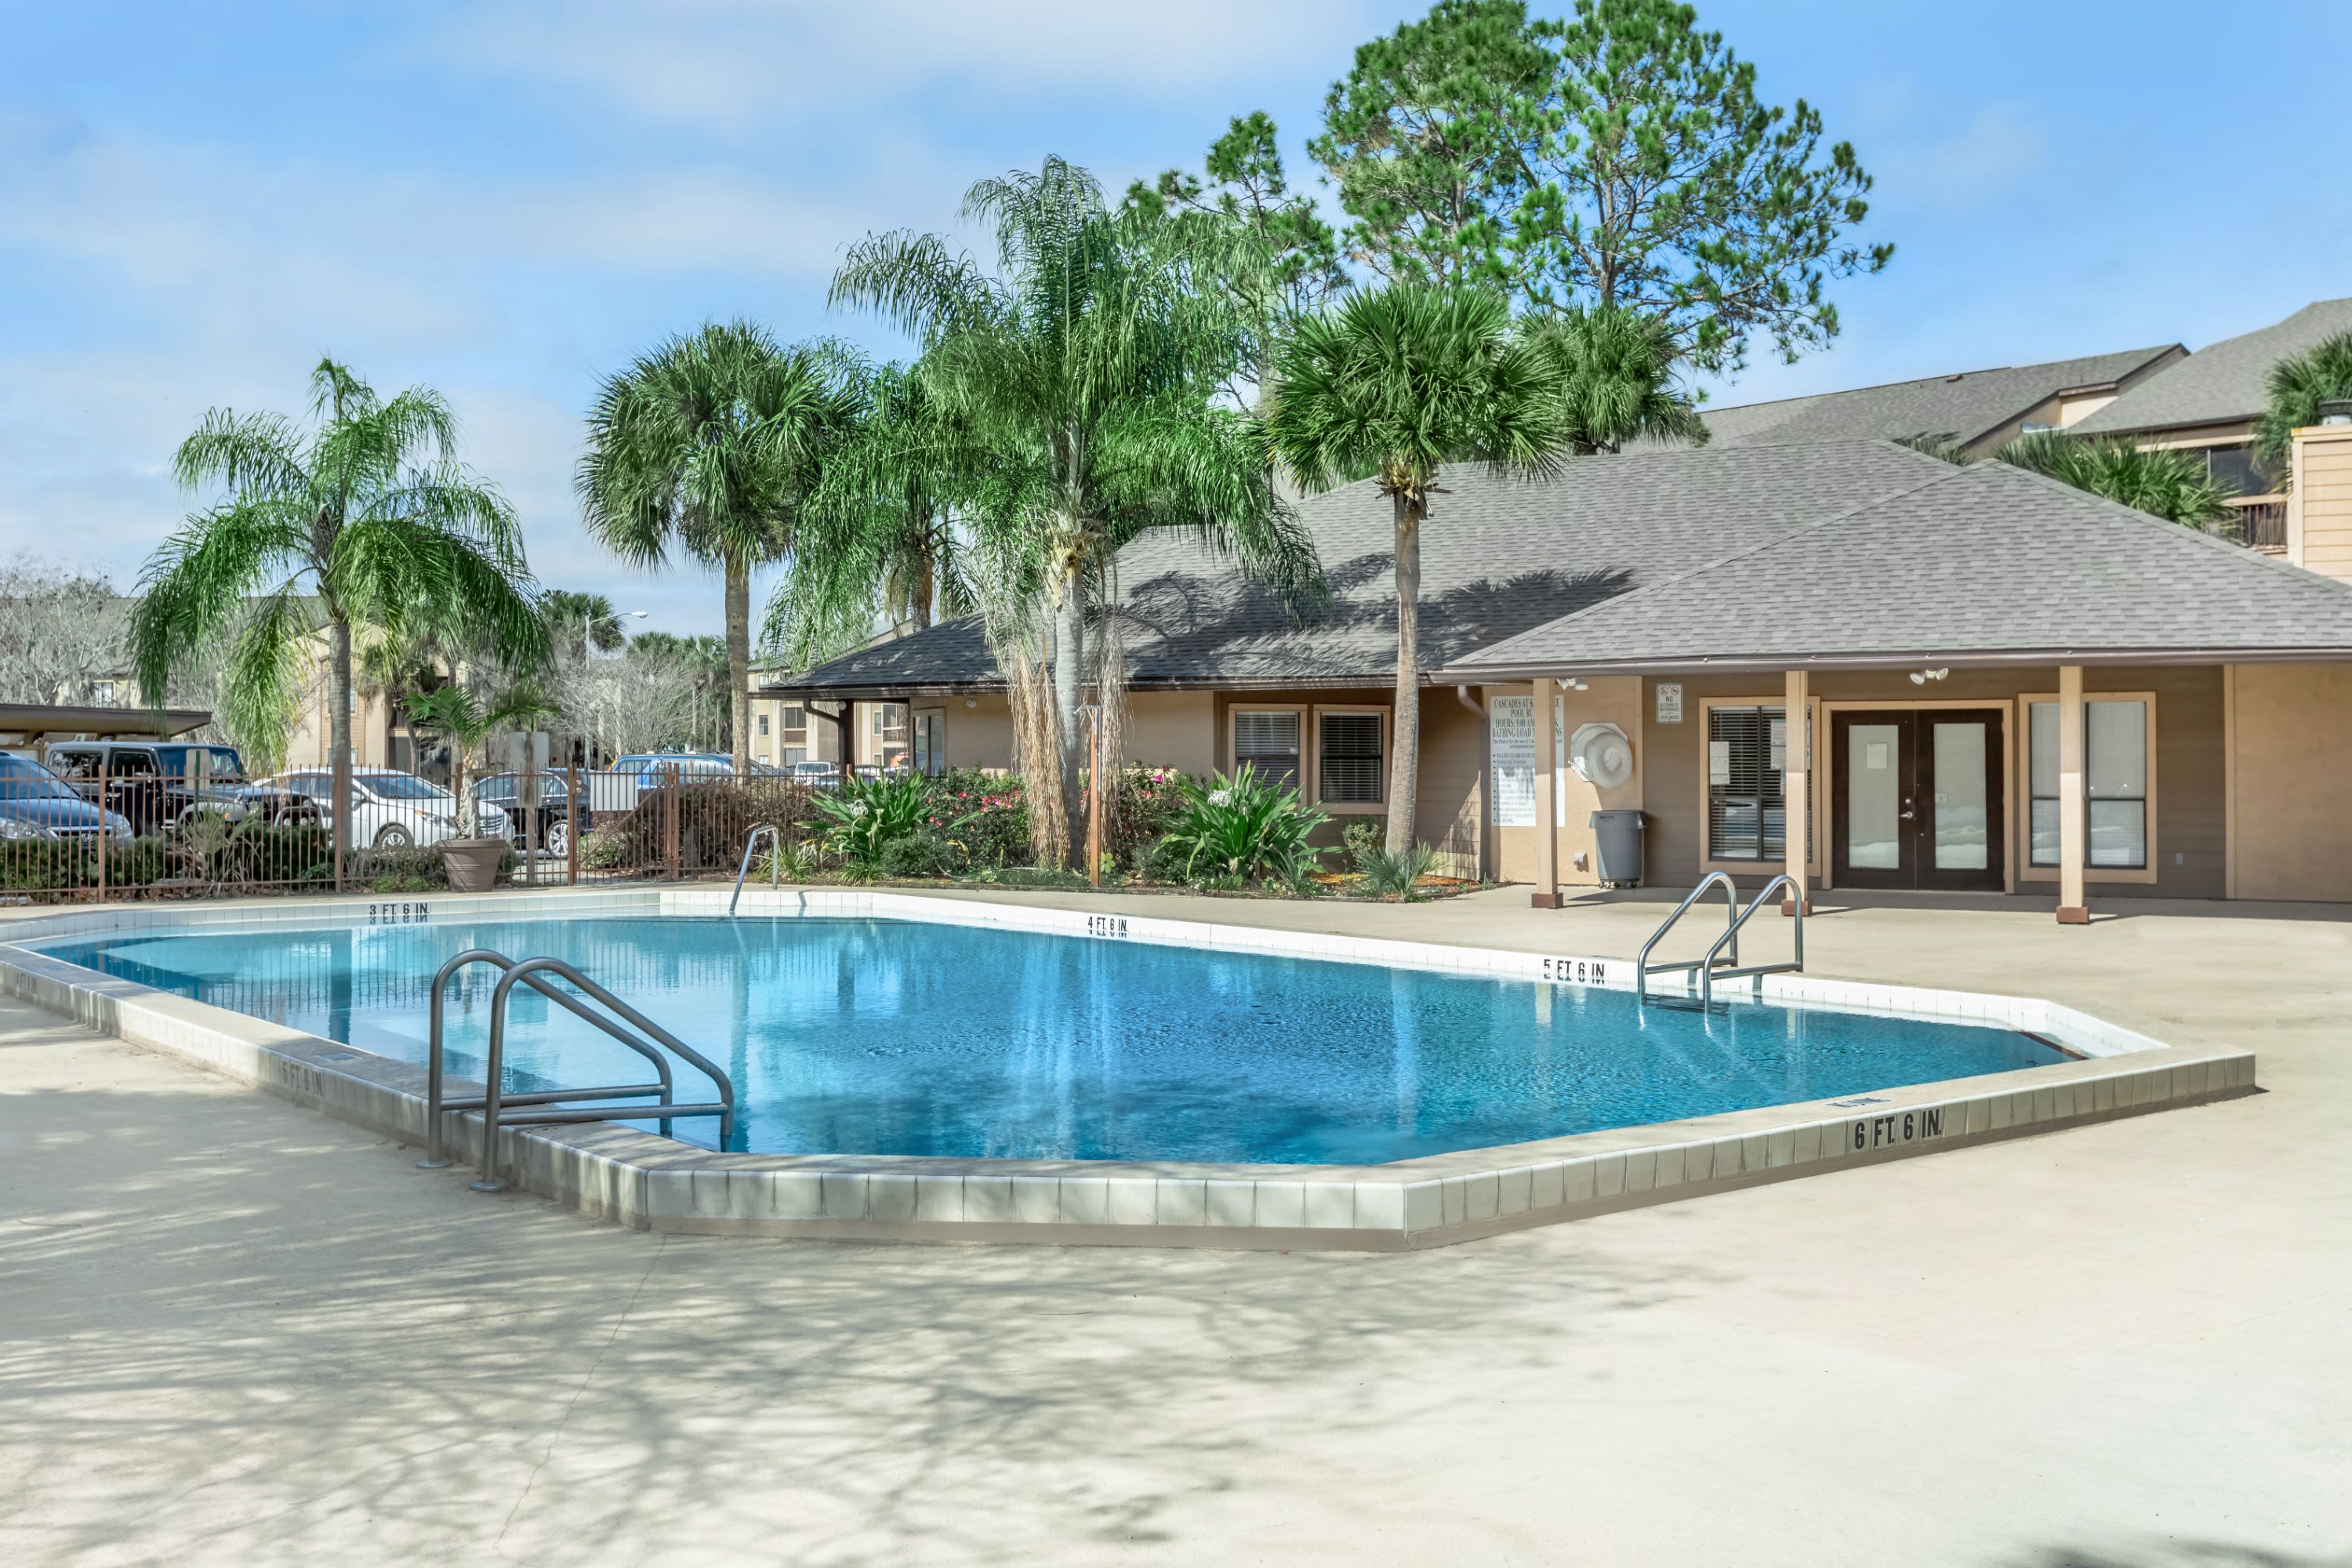 View amenities like our swimming pool at The Cascades at Kissimmee in Kissimmee, Florida